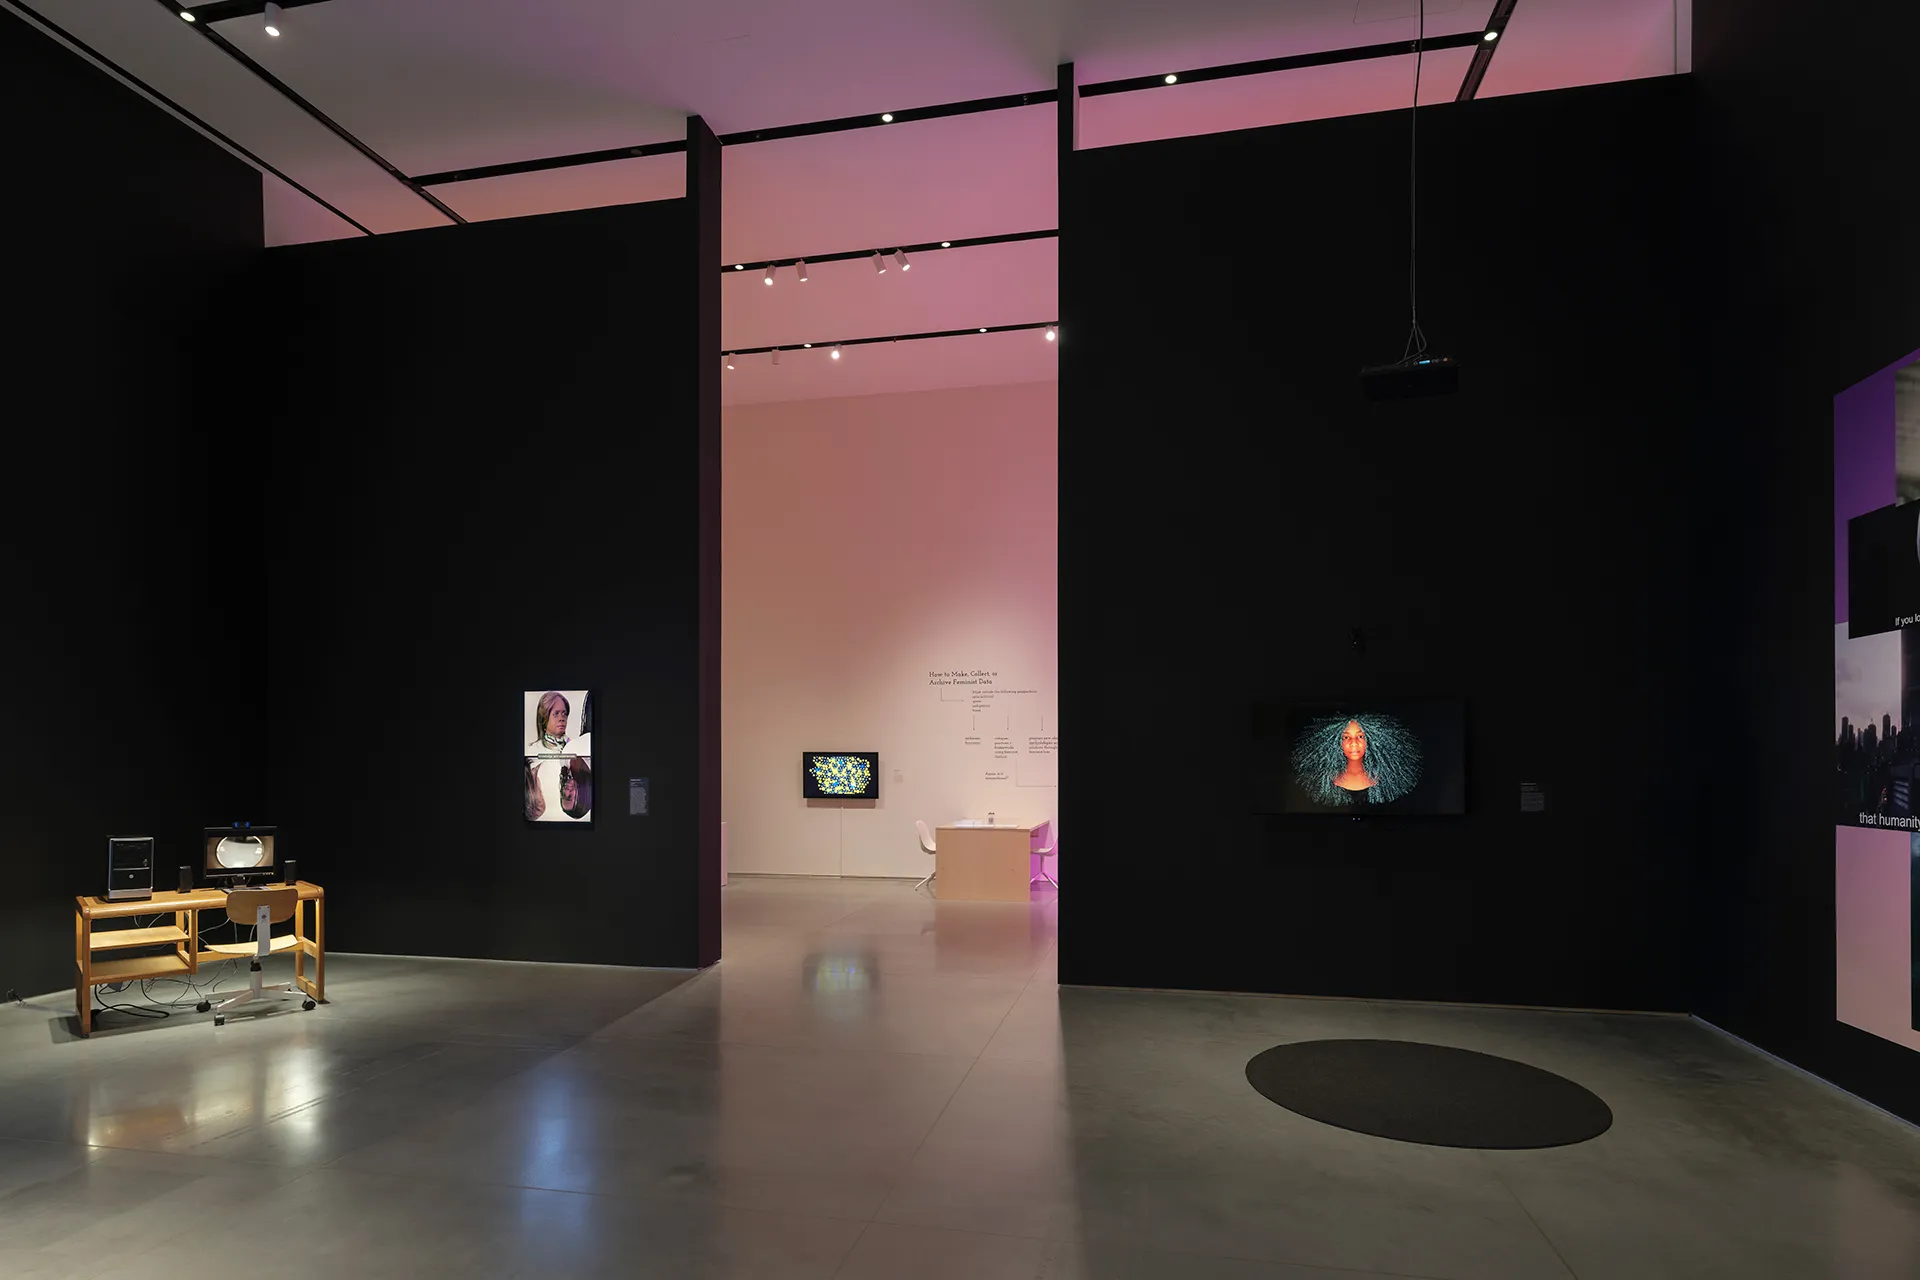 Two black walls with an aisle down the middle. Each wall has a video monitor in the center. Standing on the floor in front of the left wall, there is a wooden desk with a computer on it. On the floor, in front of the right wall, there is a round black rug.